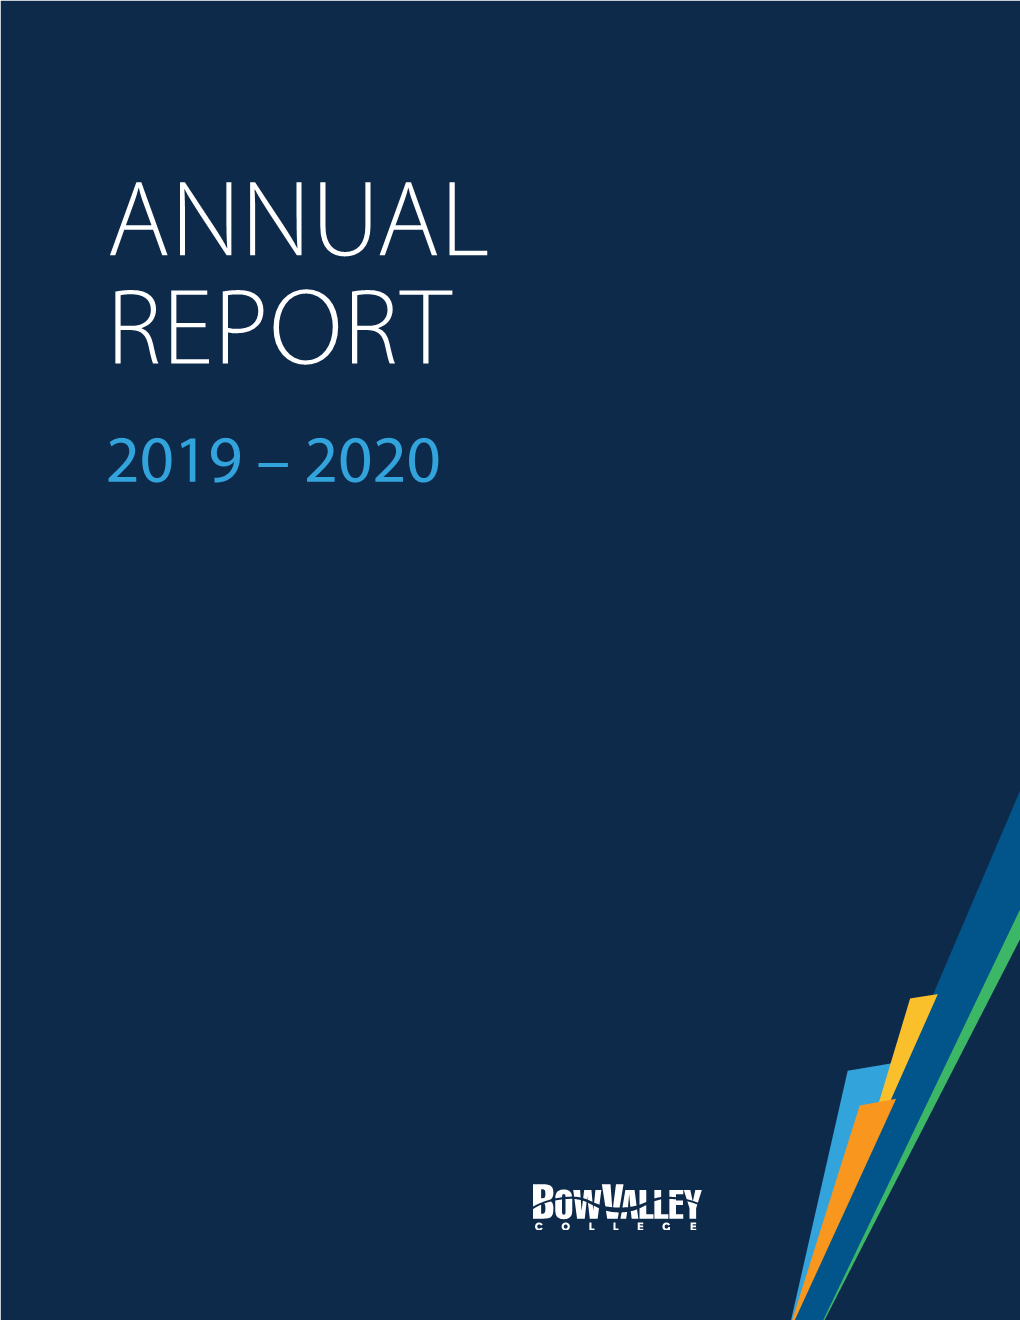 Annual Report 2019 – 2020 Contents